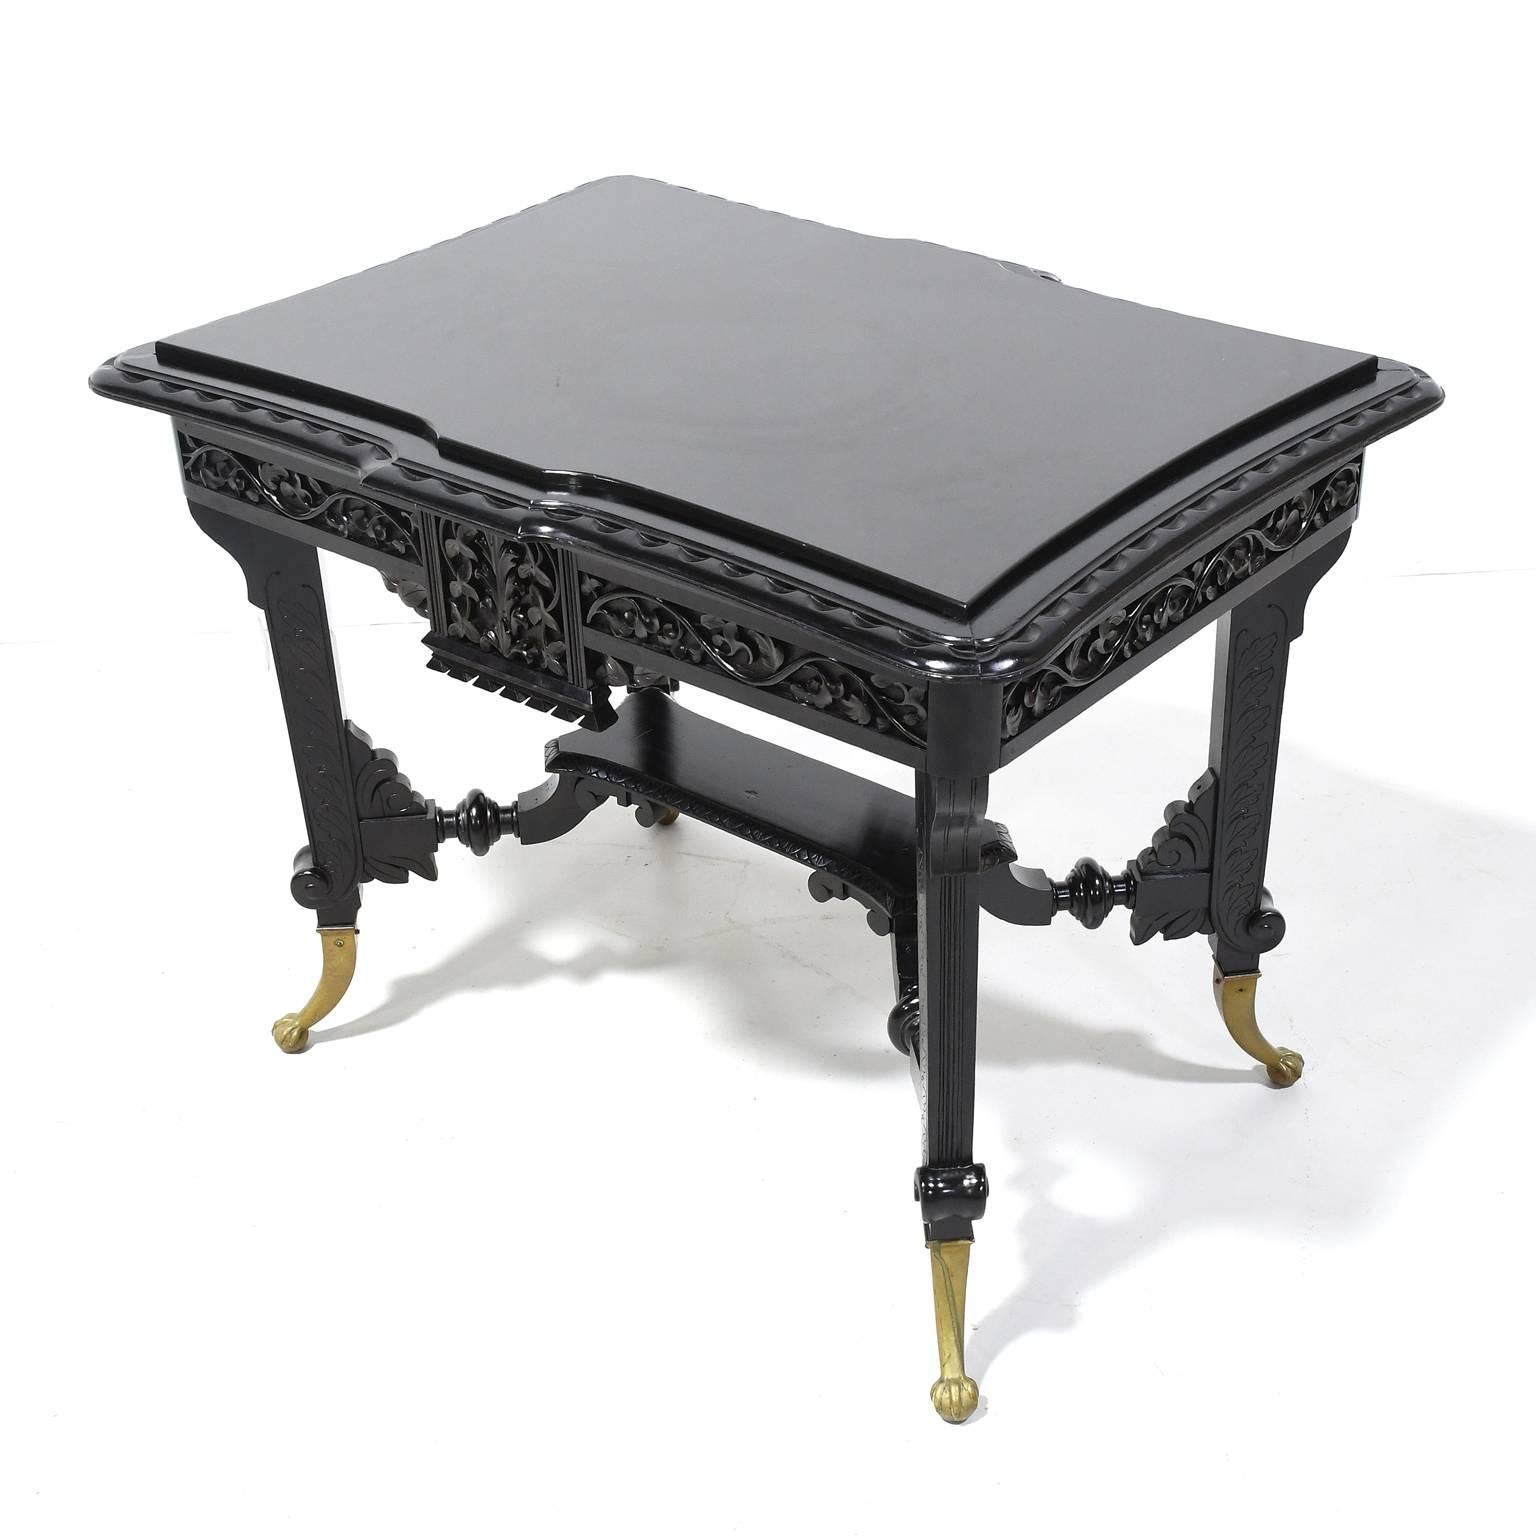 American Aesthetic Movement Centre Table in Carved Ebonized Wood with Brass Feet, c. 1870